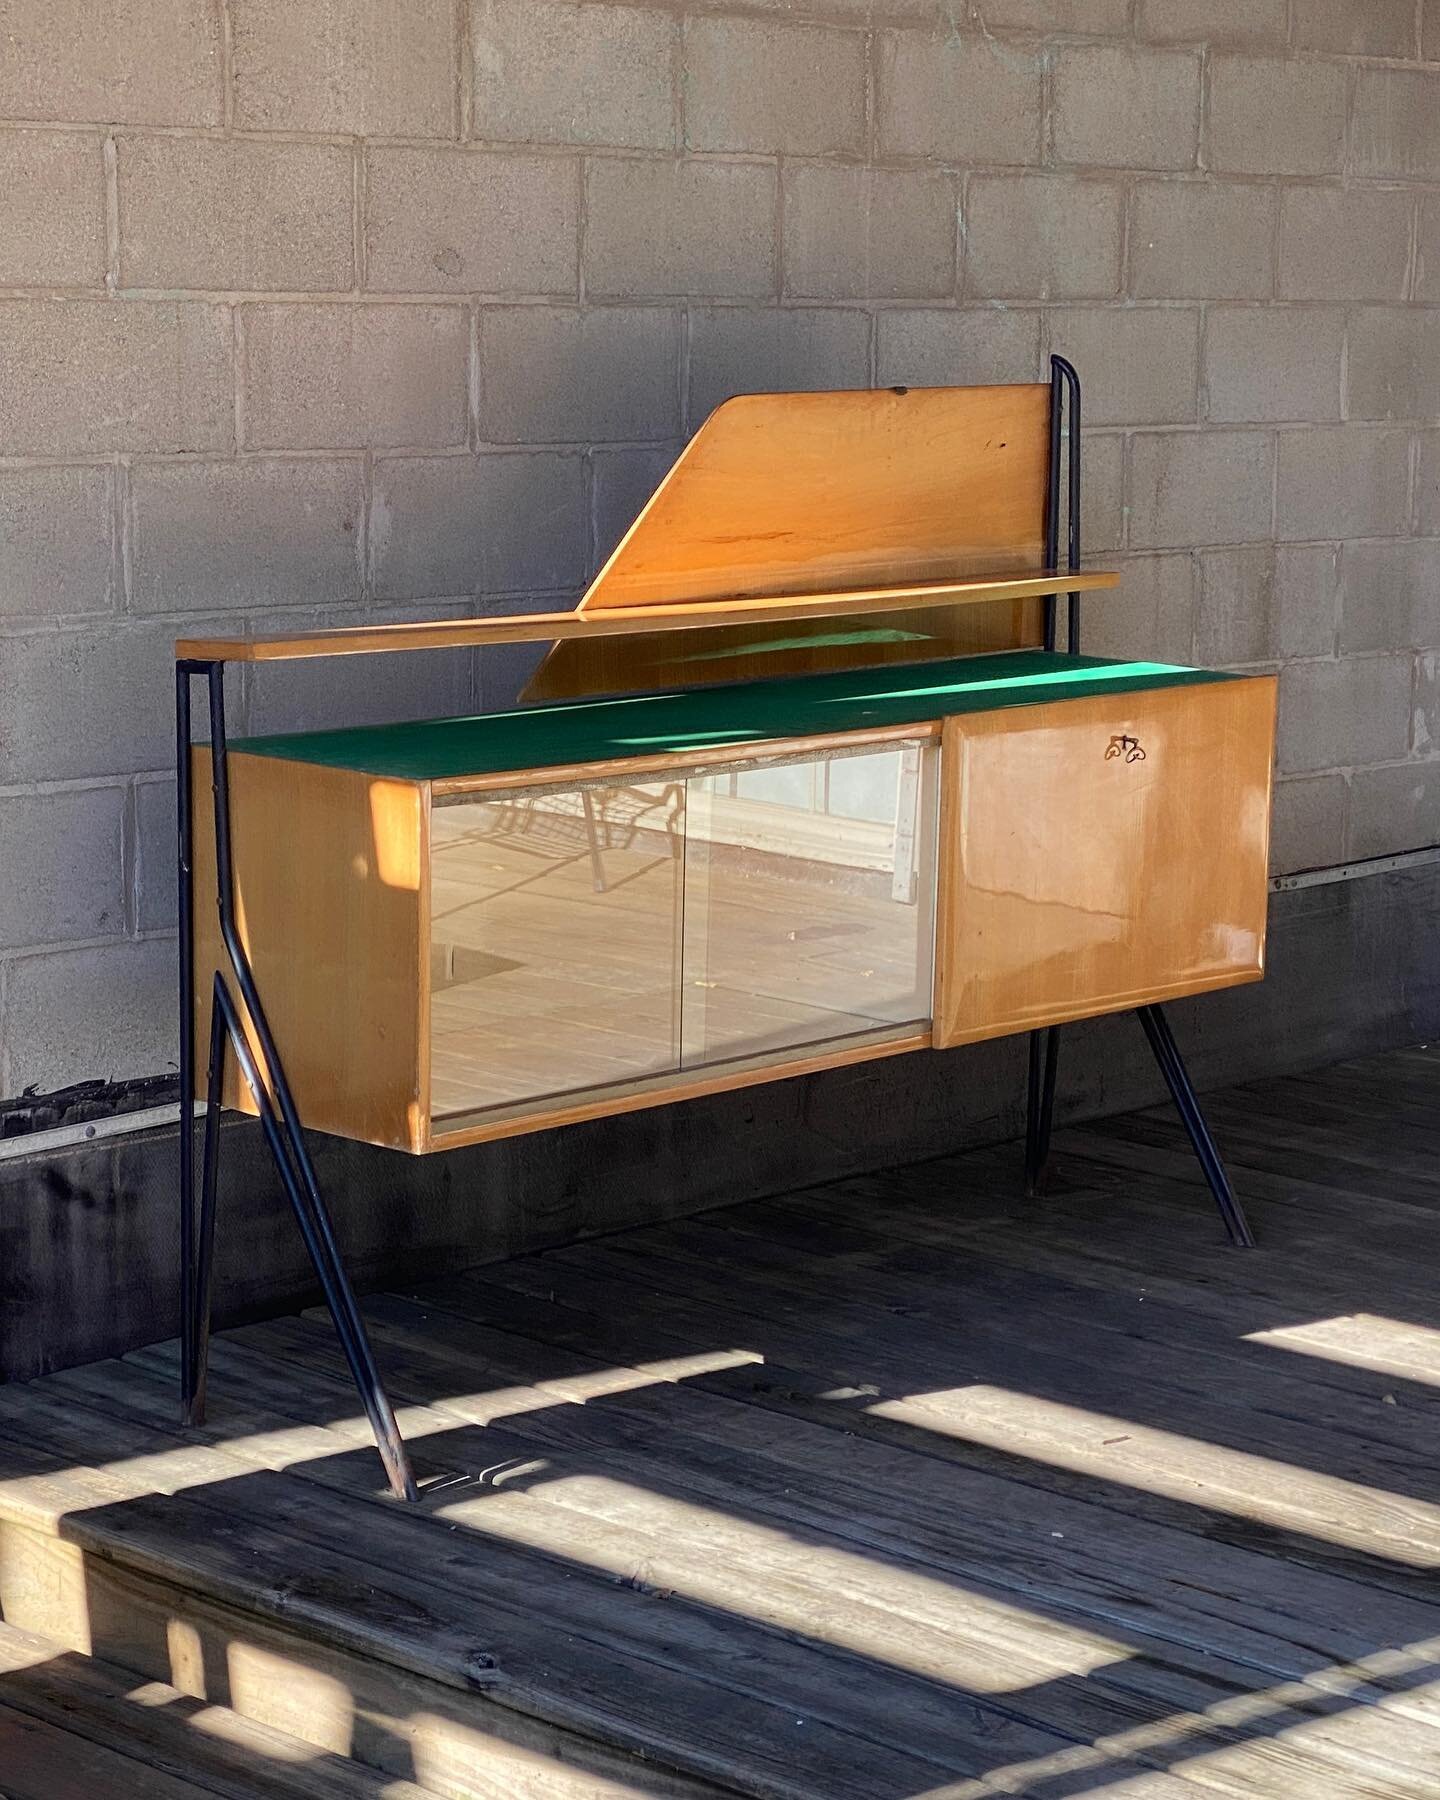 ((SOLD)) &mdash; Bar/cabinet by Vittorio Dassi for Dassi Mobili Moderni 1950&rsquo;s &mdash;  The warm and earthy colors really makes this&mdash; How about a project piece that works as is. This is a weird one. This was shipped to me by accident, ins